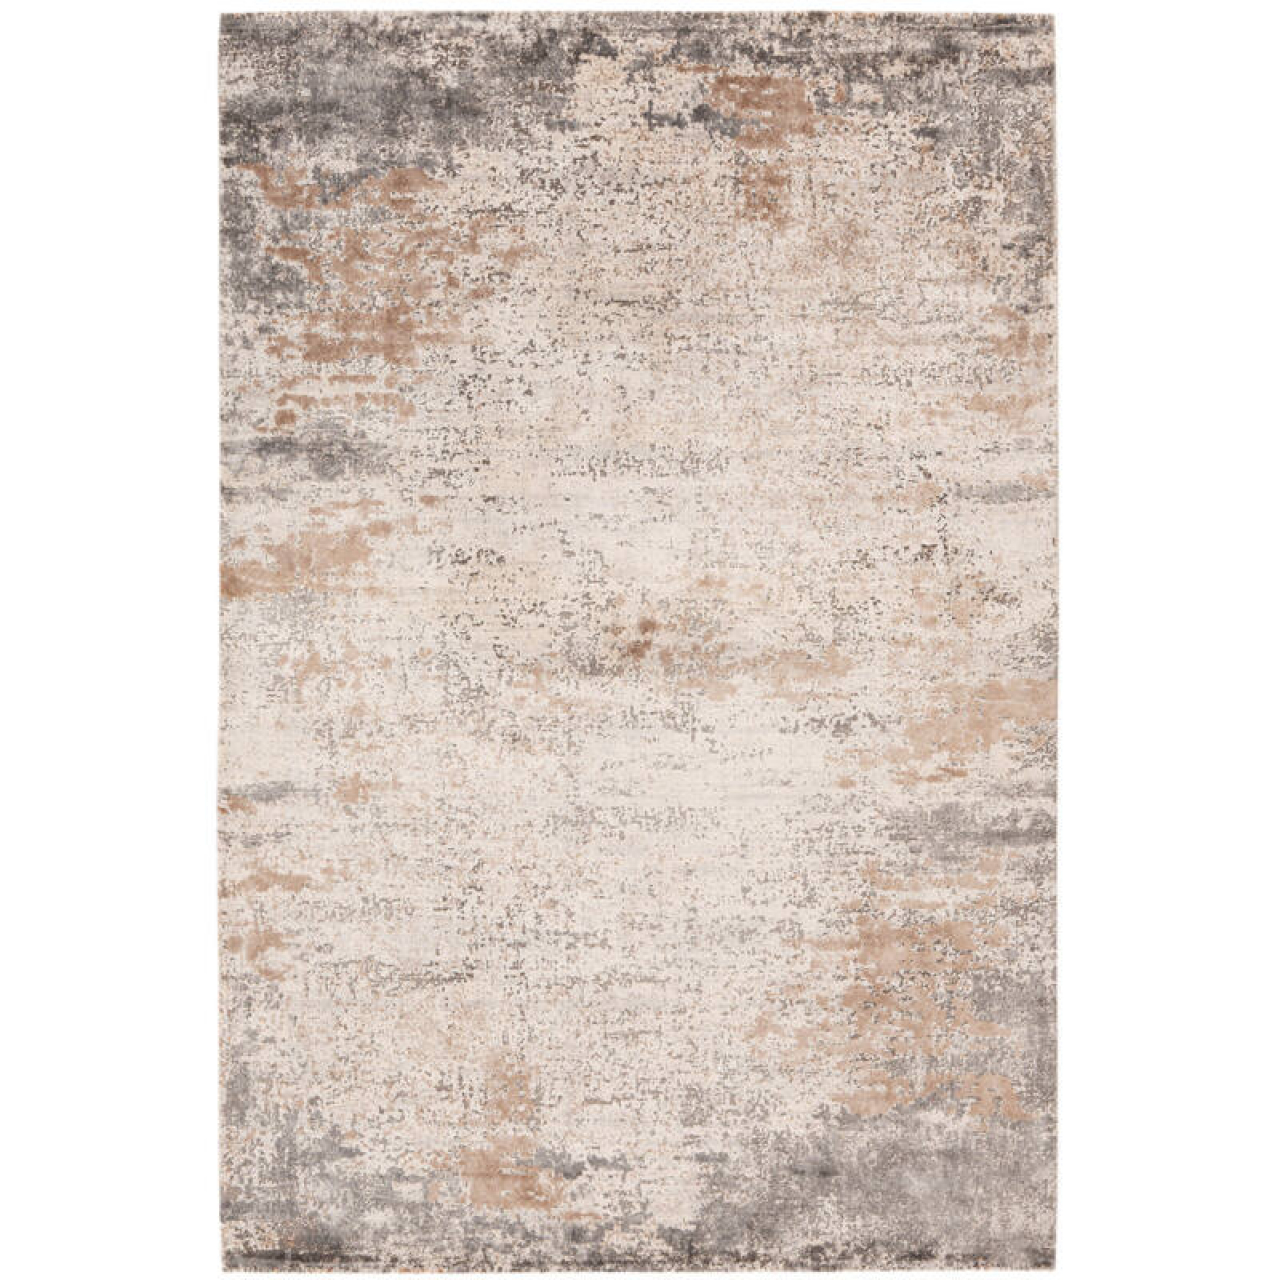 Obsession Haute Couture Jewel 953 Taupe szőnyeg-160x230